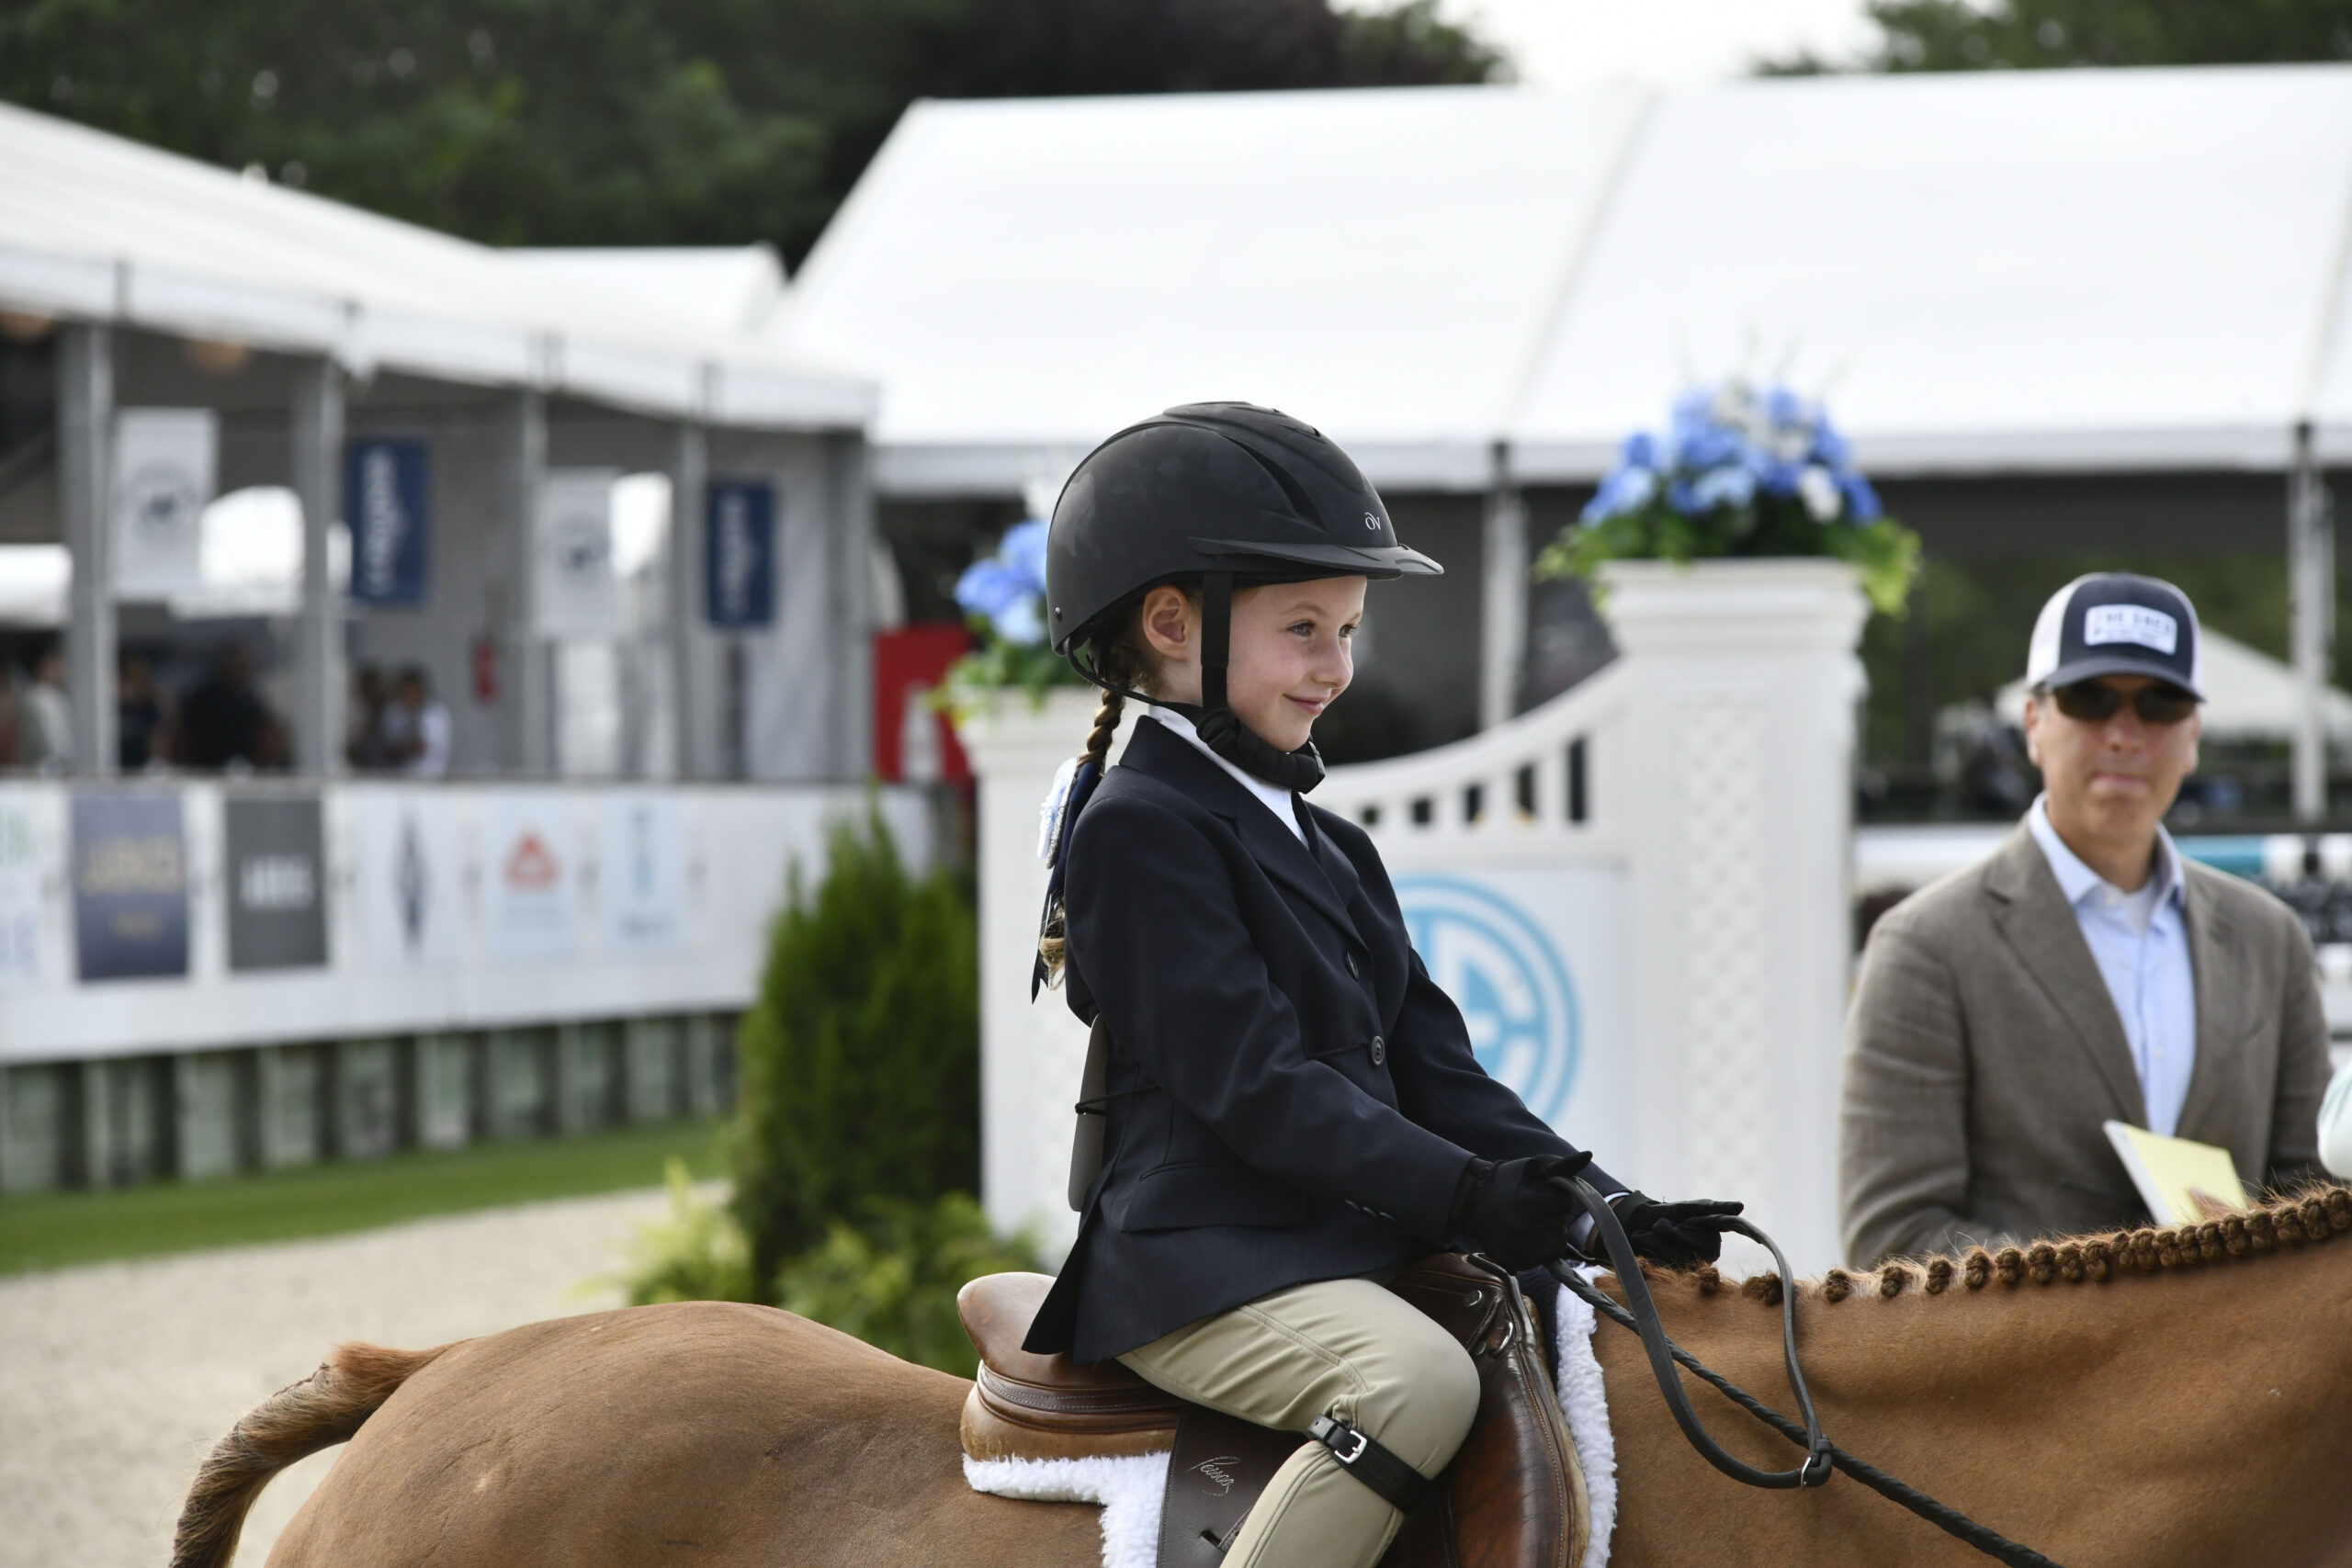 Riders compete in the  Leadline 2 to 4-year-old section on Sunday.  DANA SHAW